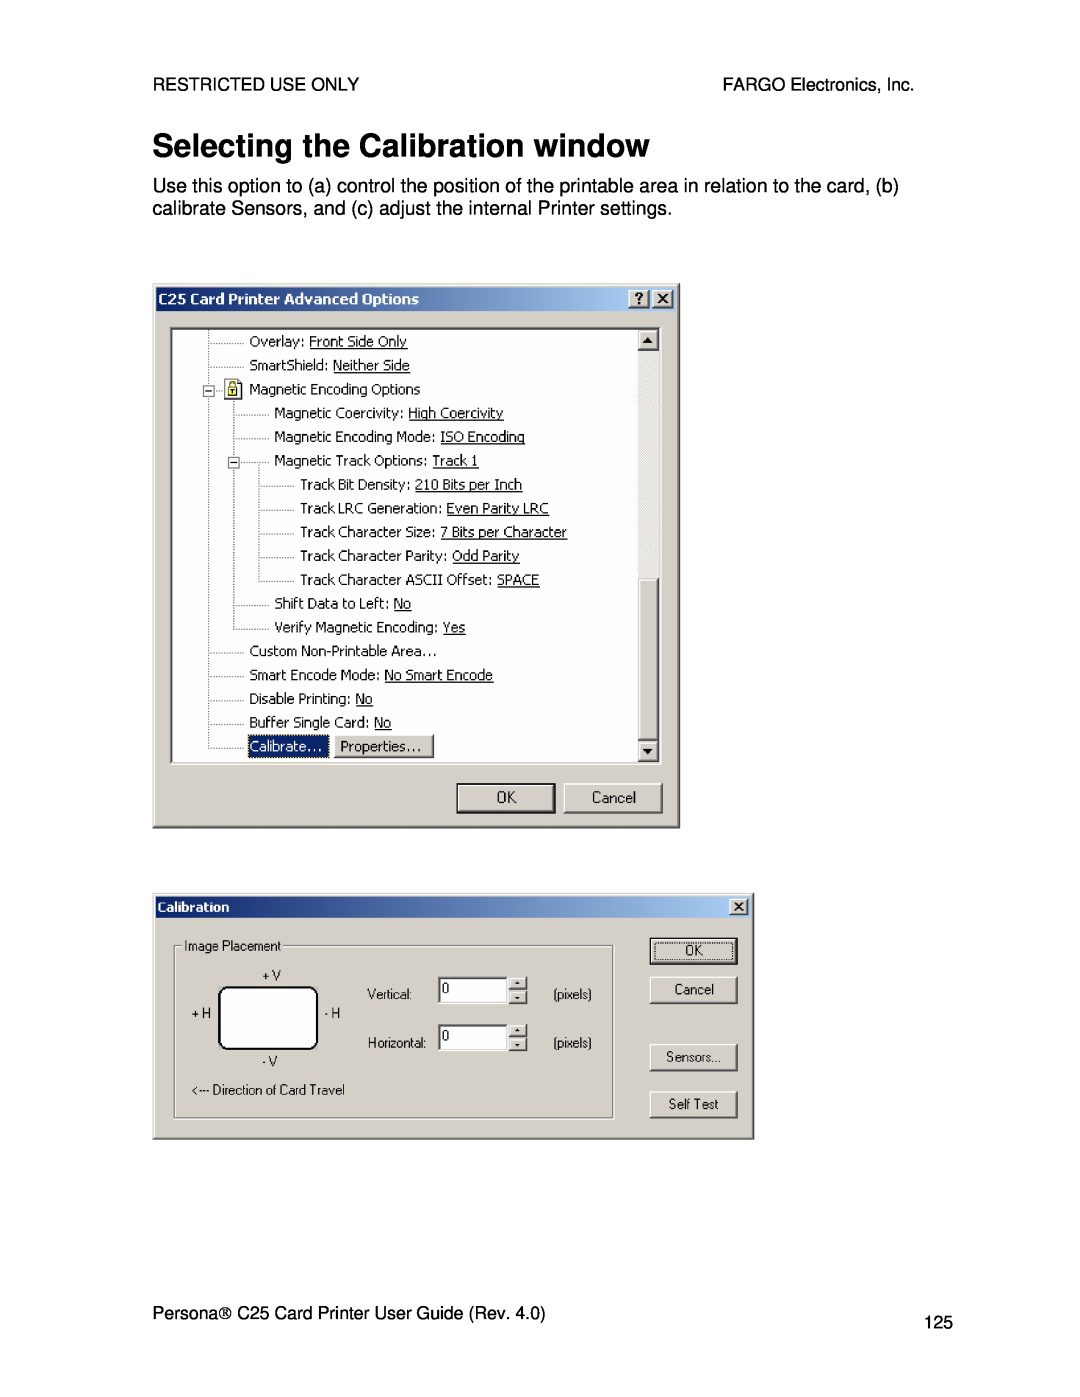 FARGO electronic S000256 manual Selecting the Calibration window, Restricted Use Only, FARGO Electronics, Inc 